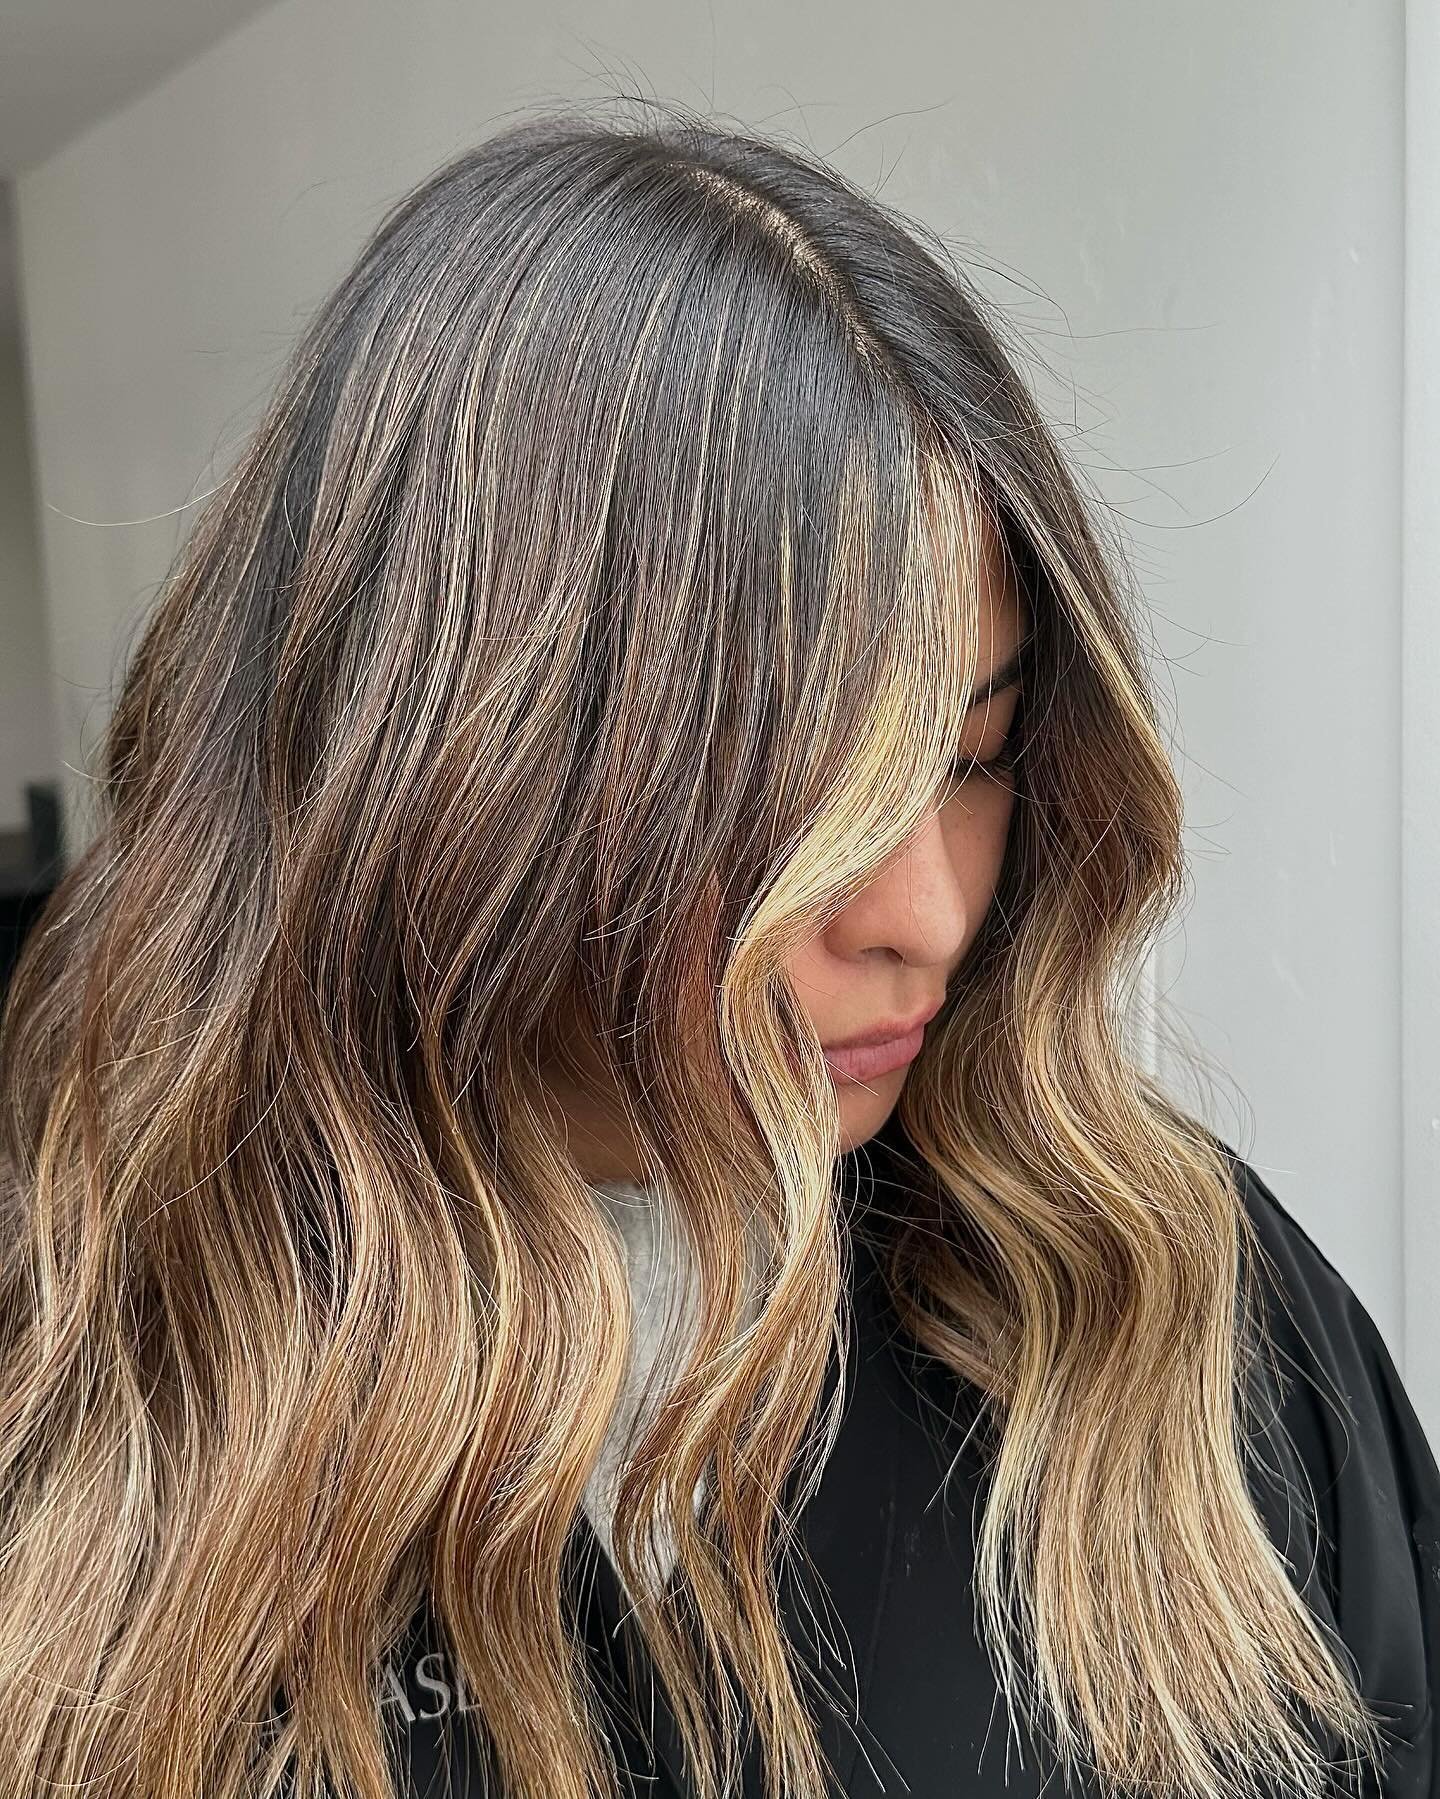 Your next highlight inspo ✨ full highlight &amp; tip out style by @daisymln 

At Diesel Salon, your hair journey Is more than a consultation, it's knowing that each conversation is a customized experience tailored toward your hair journey.

It's not 